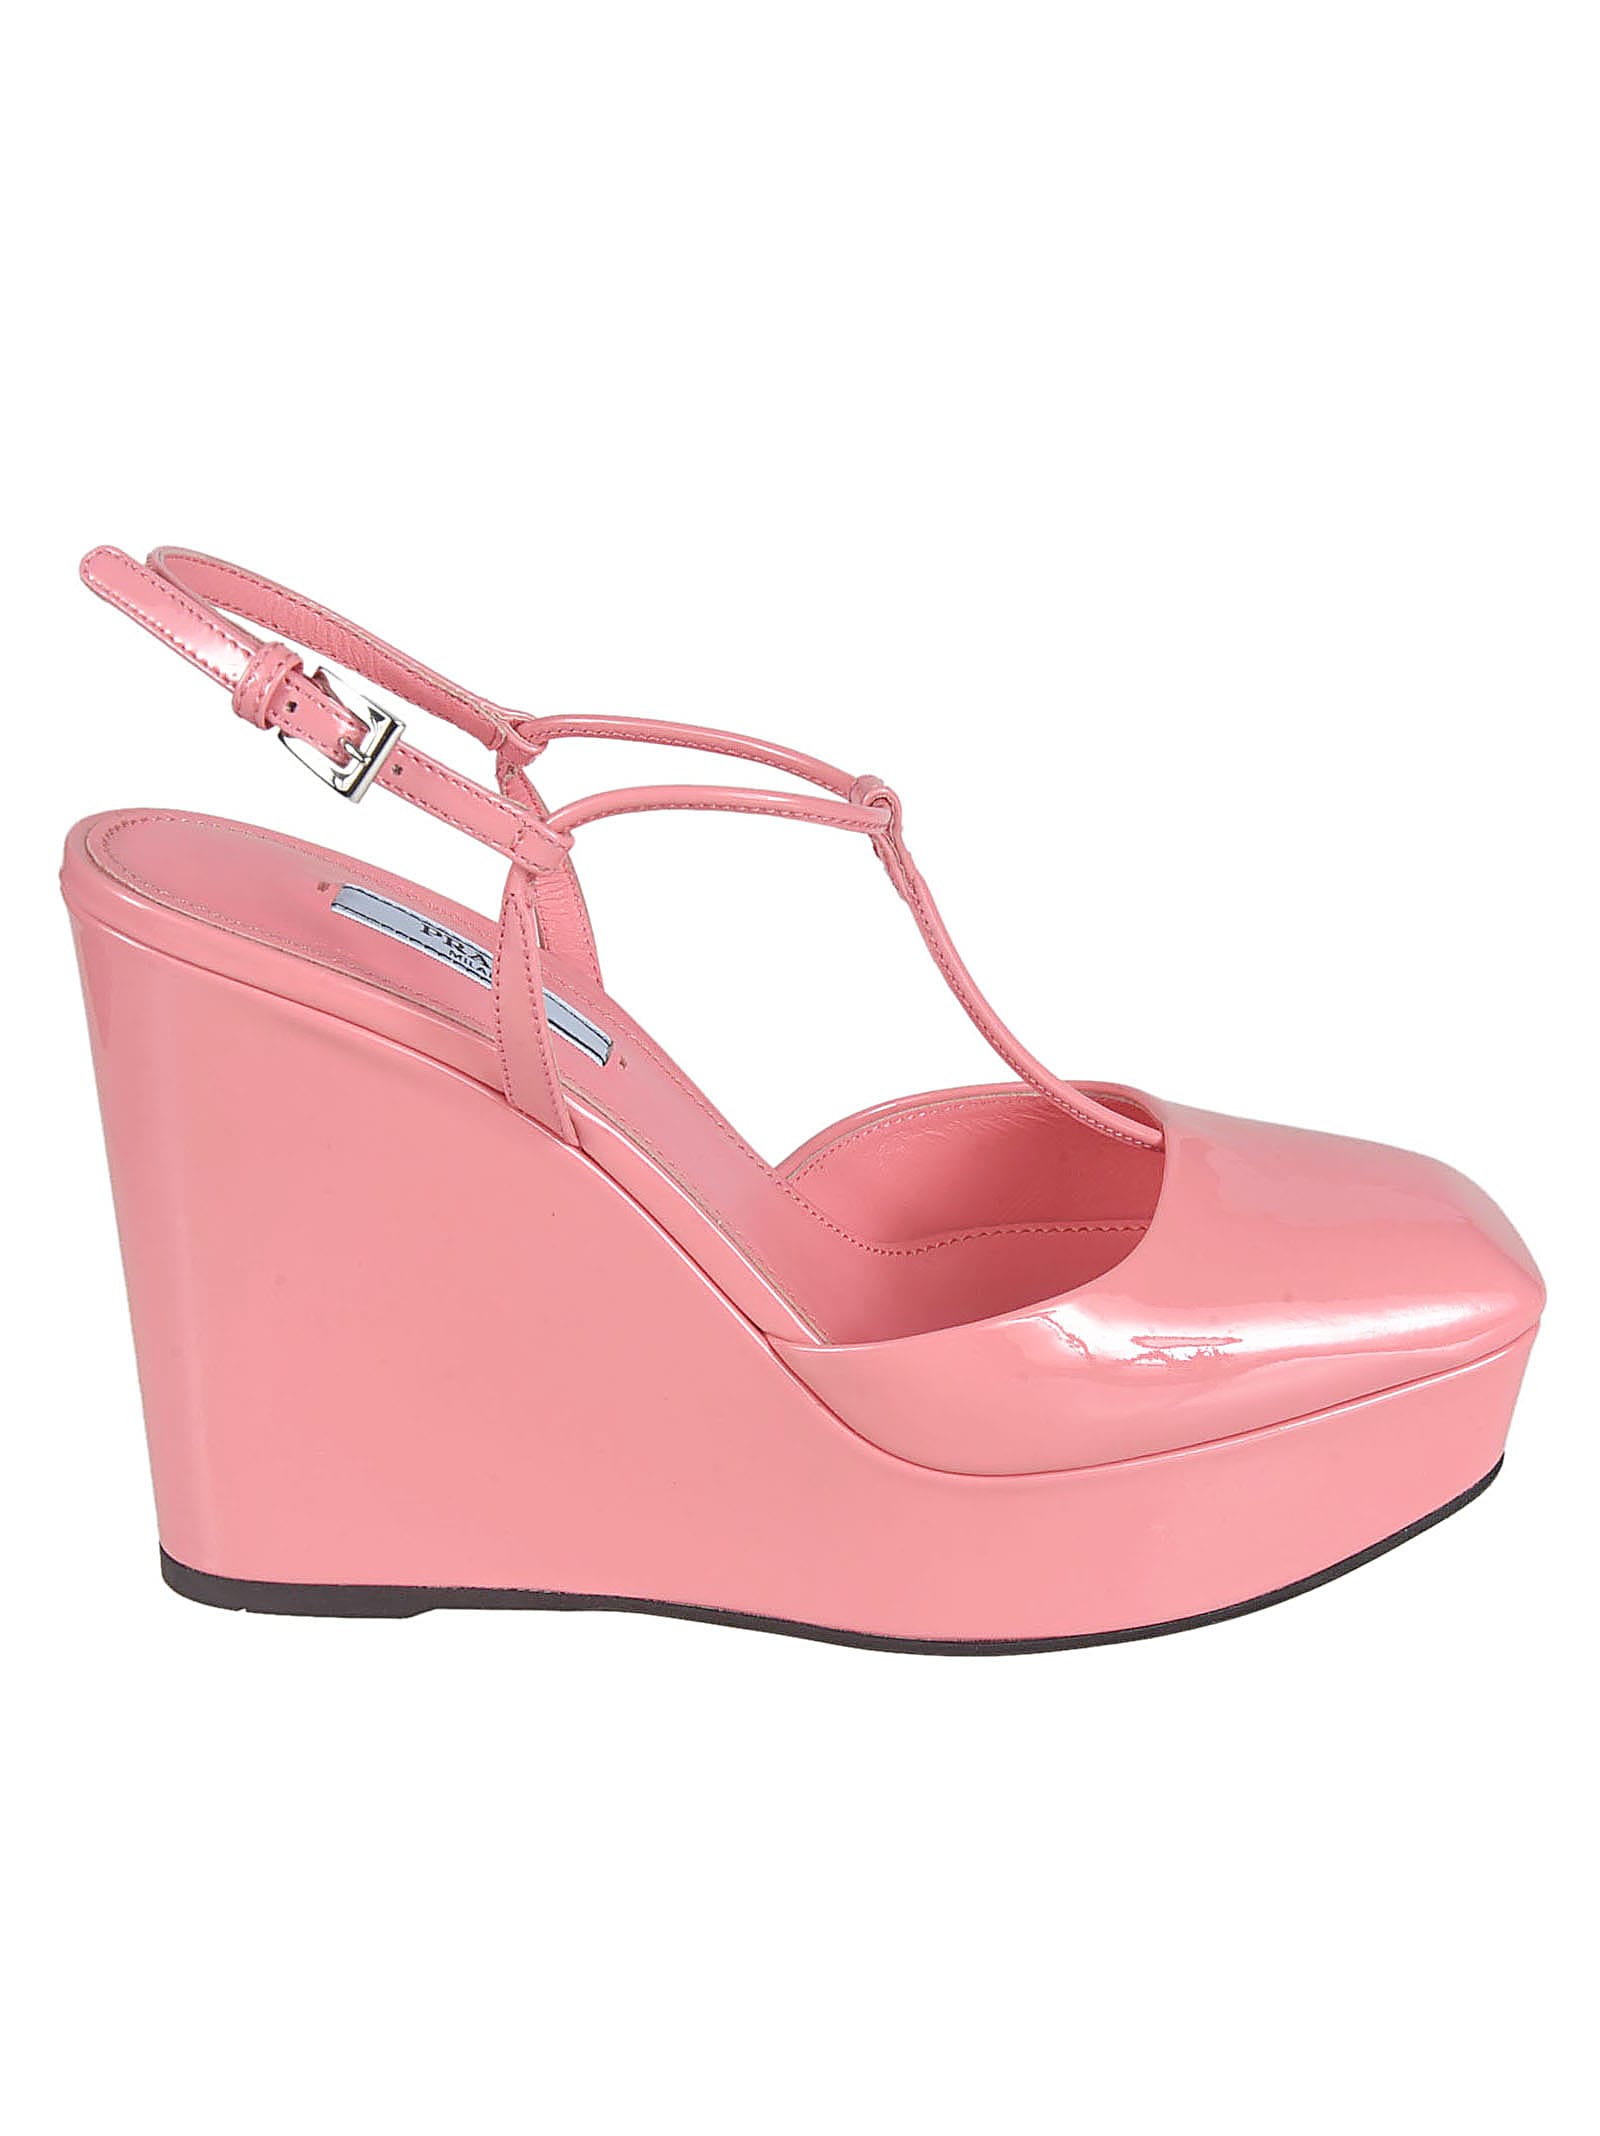 Buy Prada Buckled Wedge Sandals online, shop Prada shoes with free shipping